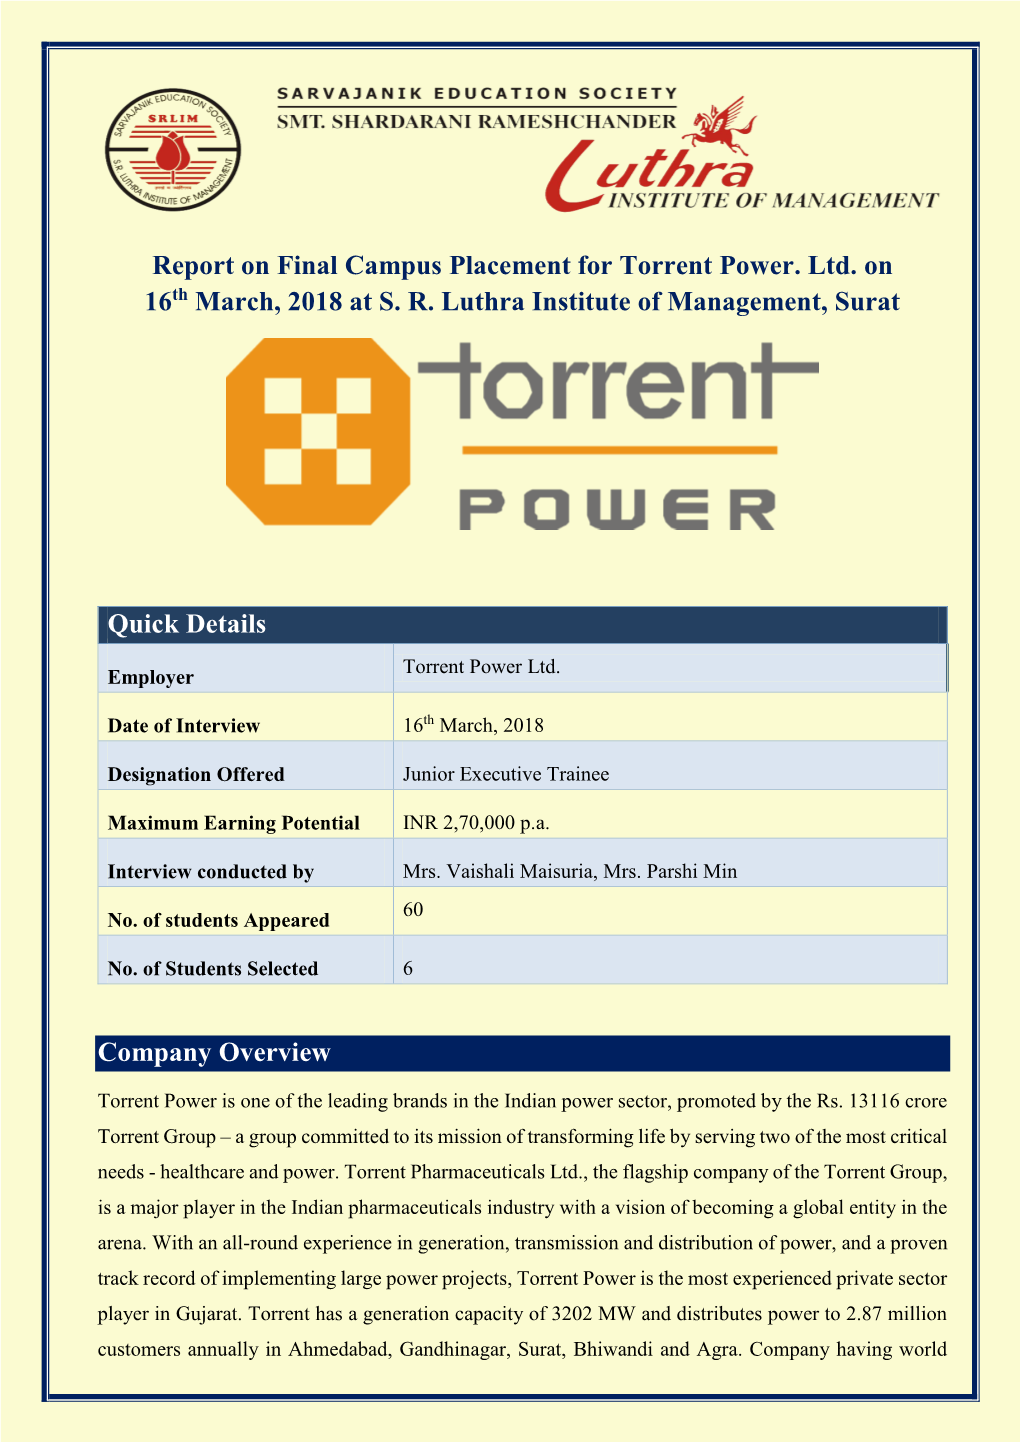 Report on Final Campus Placement for Torrent Power. Ltd. on 16Th March, 2018 at S